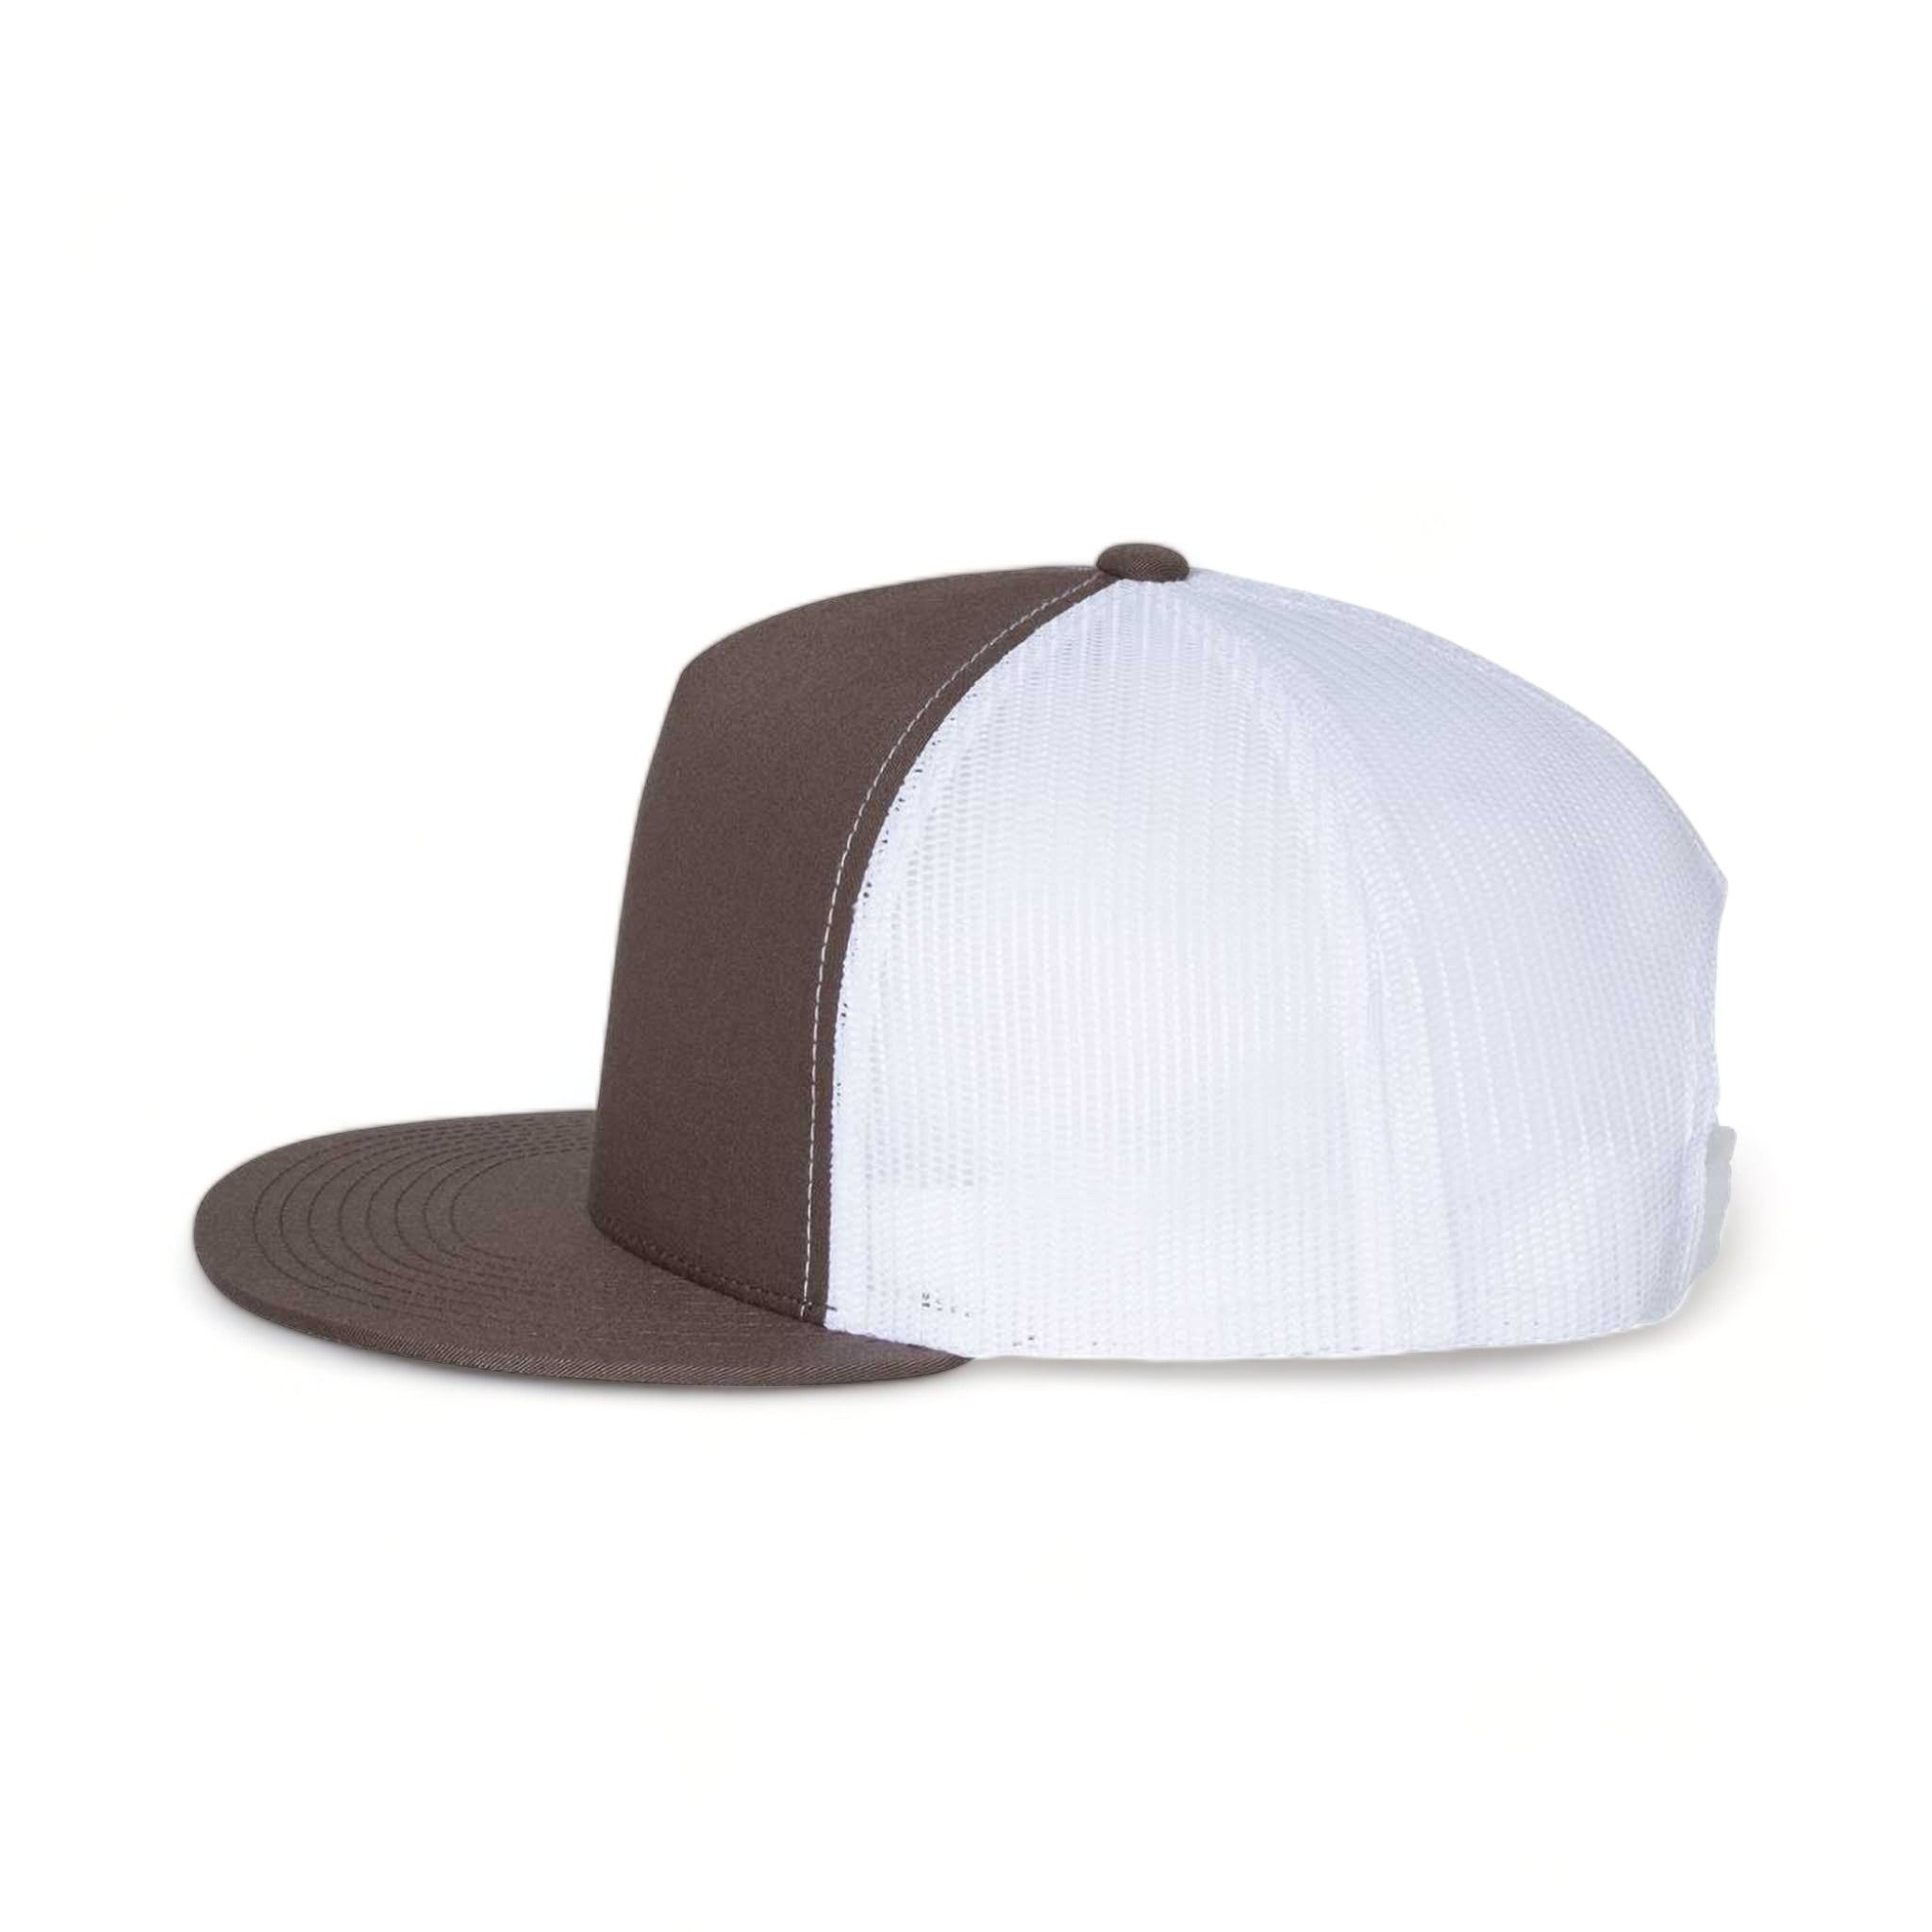 Side view of YP Classics 6006 custom hat in brown and white